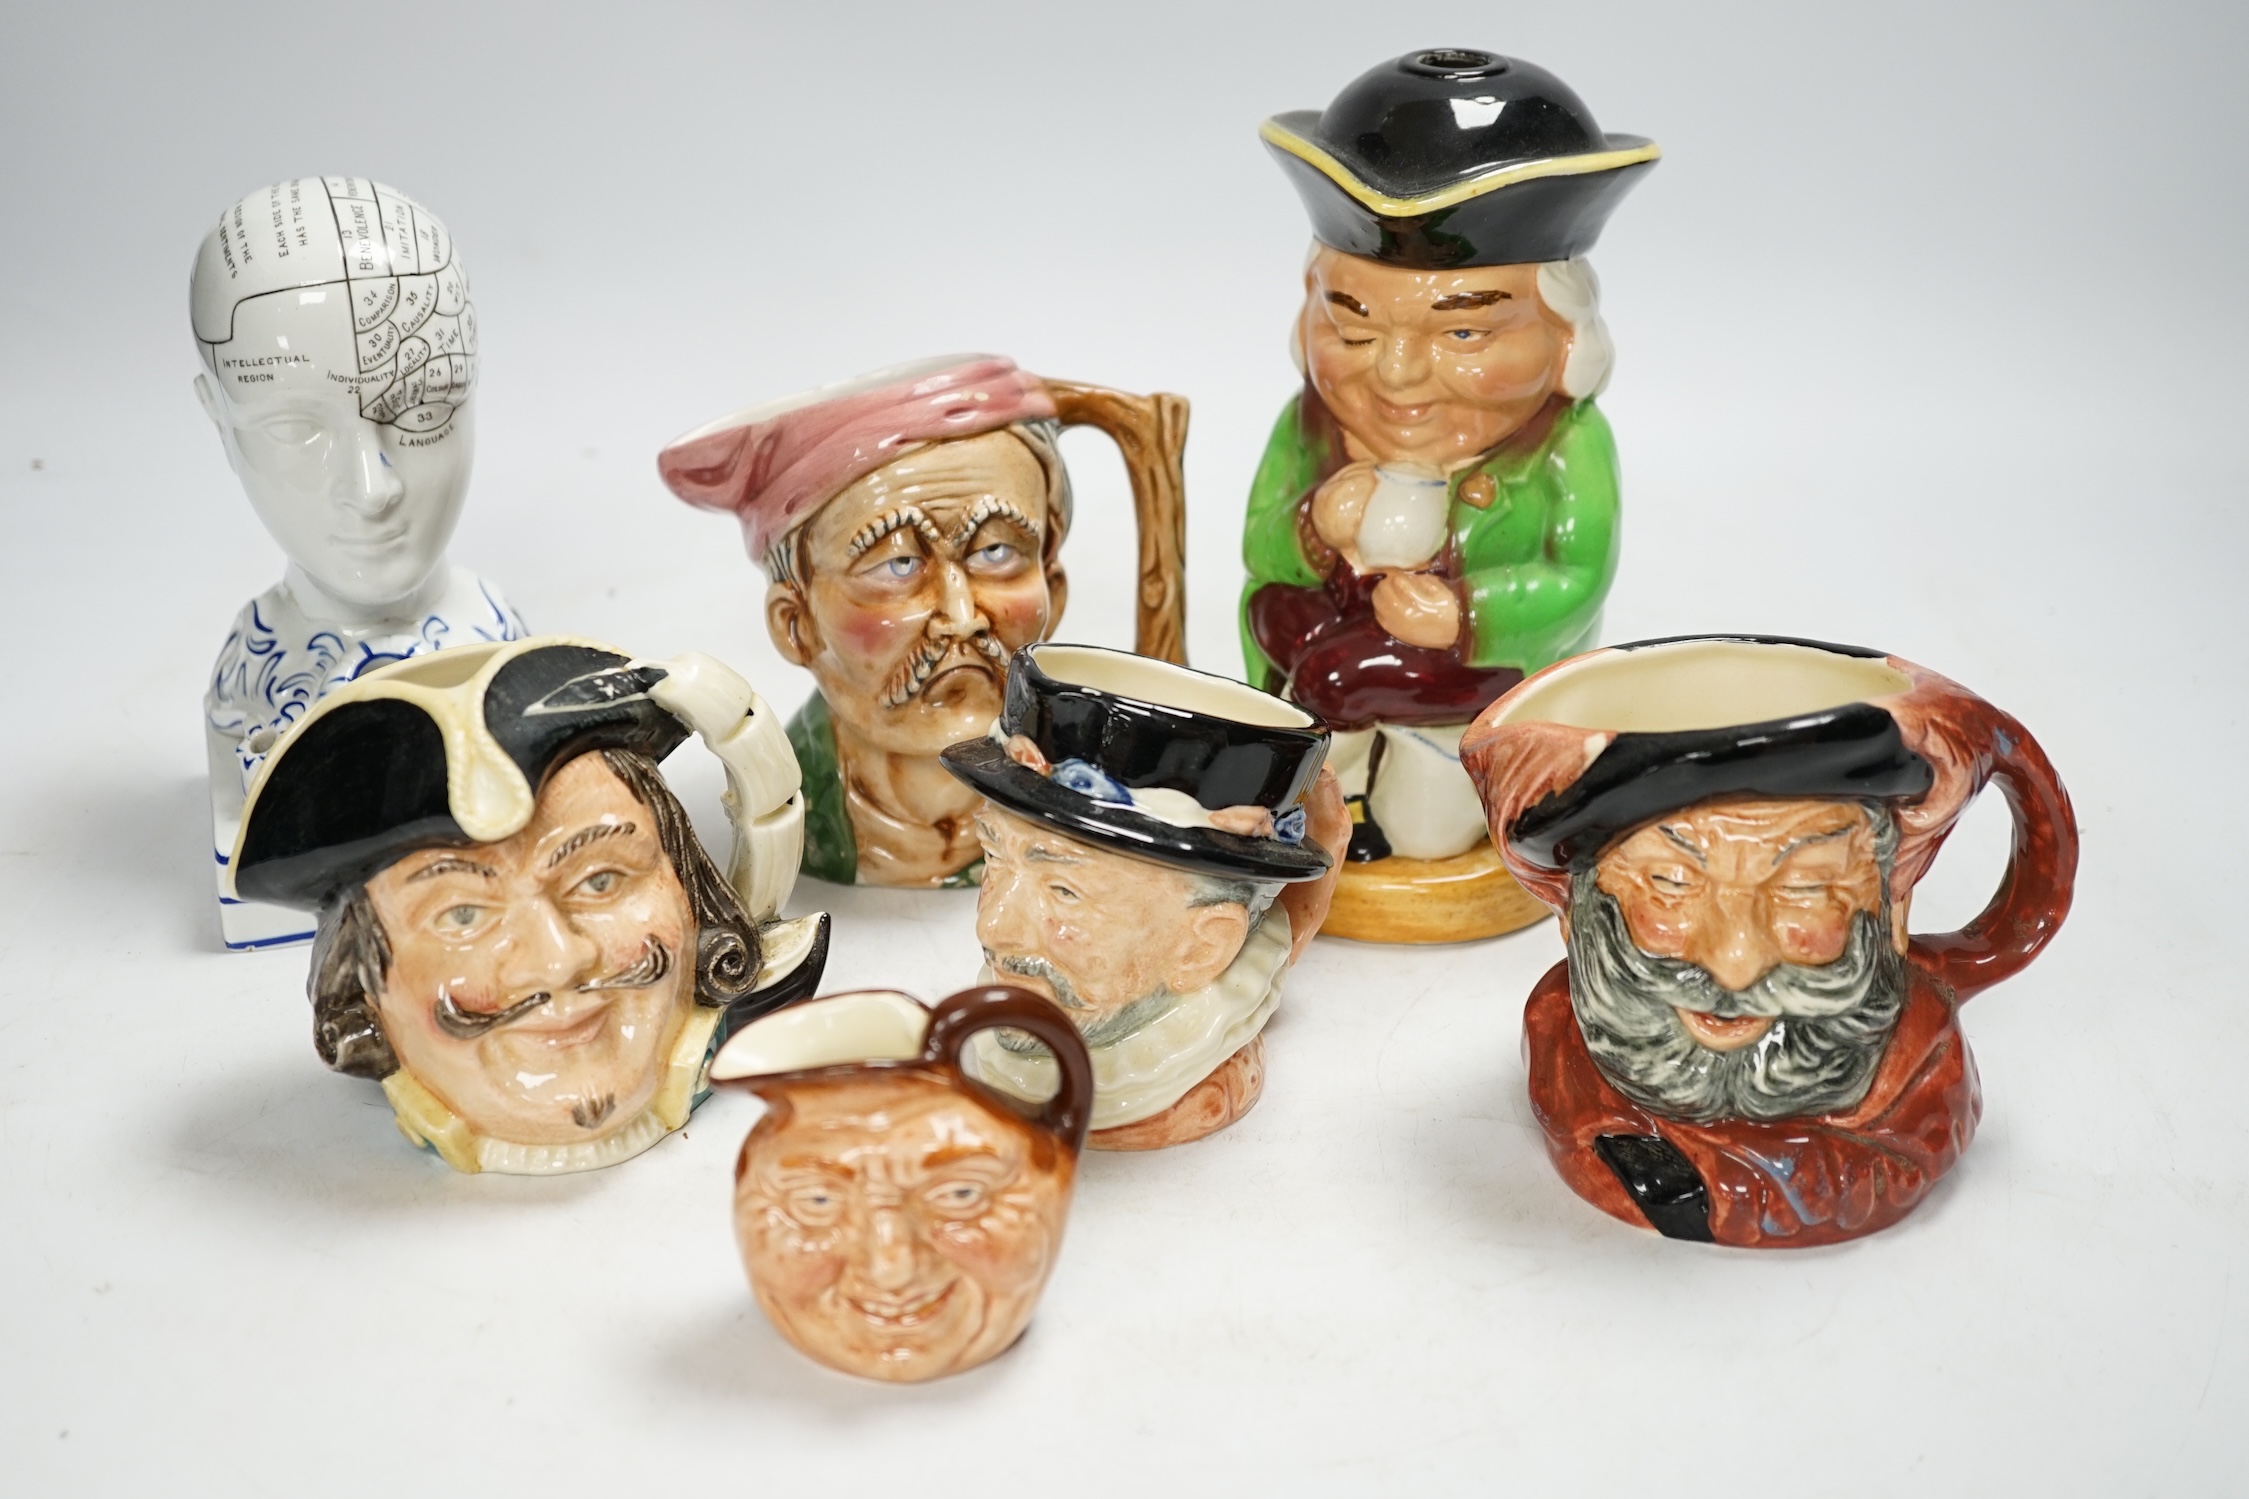 An F. Bridges Phrenology head inkstand, four Royal Doulton Toby jugs, two others, a phrenology bust and a framed pietra dura panel, tallest 17cm. Condition - poor to good, bust broken and re-glued